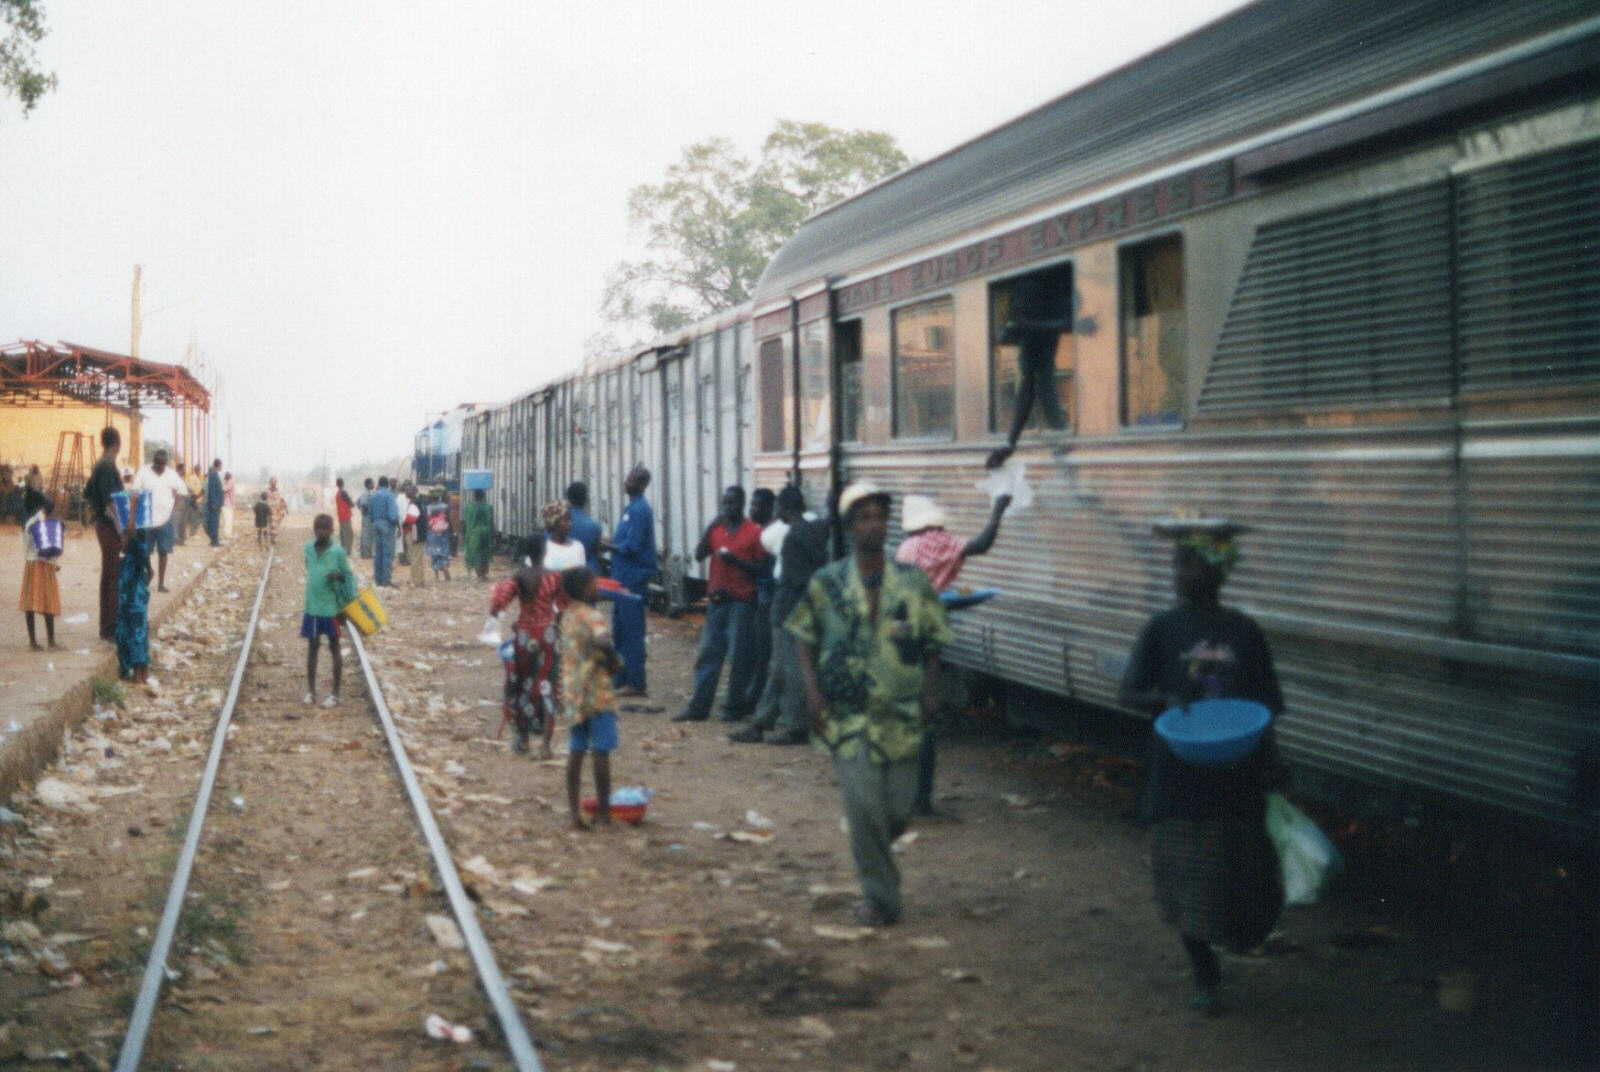 The Dakar to Bamako express at a local station, with plenty of vendors to sell you things